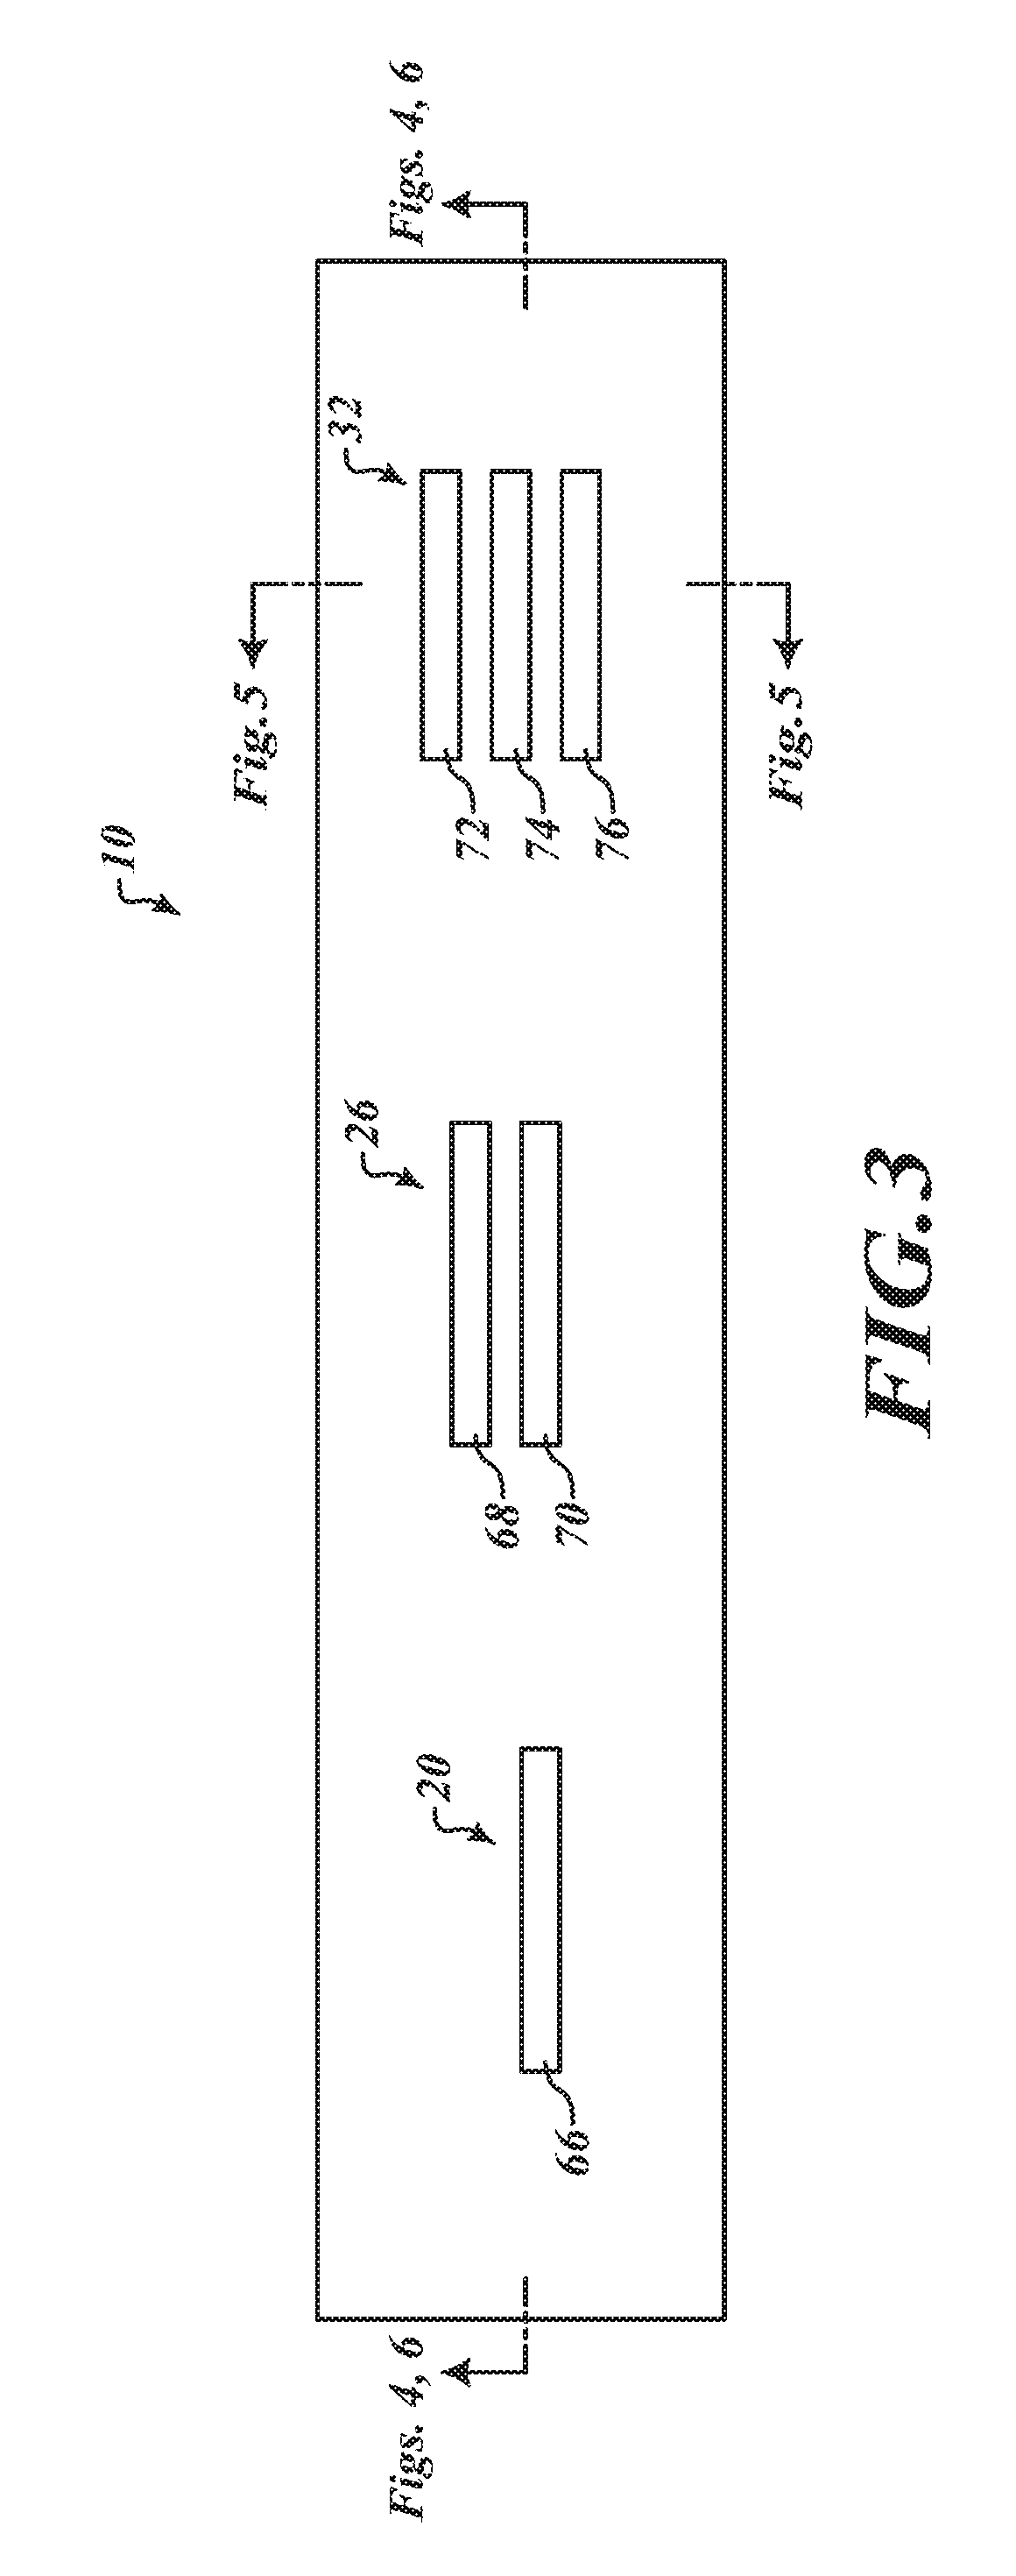 Adaptive test method and designs for low power mox sensor